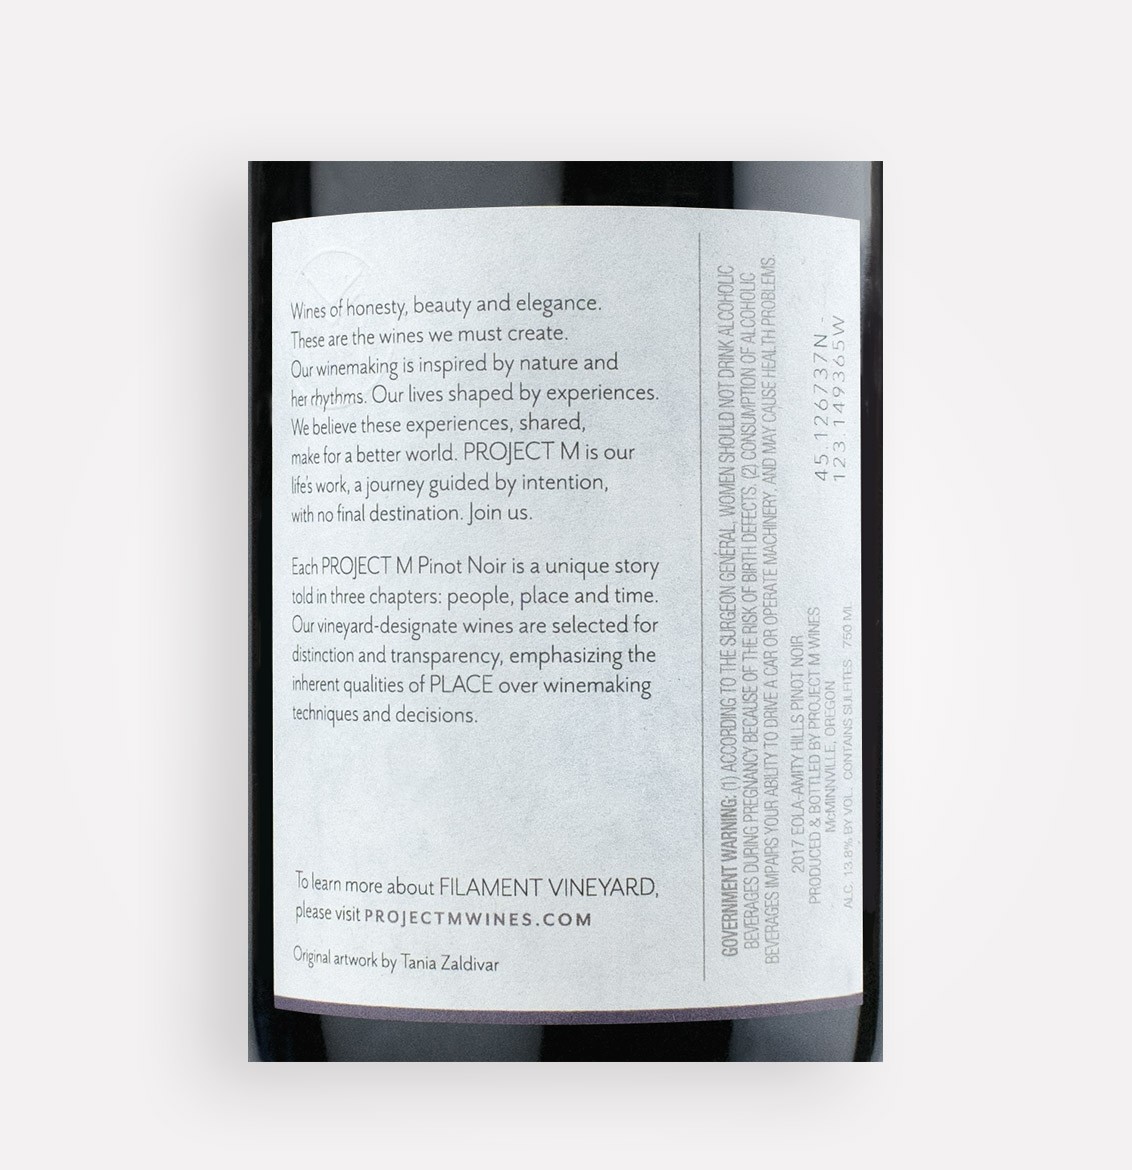 Back label close-up of Project M 2017 Filament Vineyard Pinot Noir wine from Oregon's Eola-Amity Hills